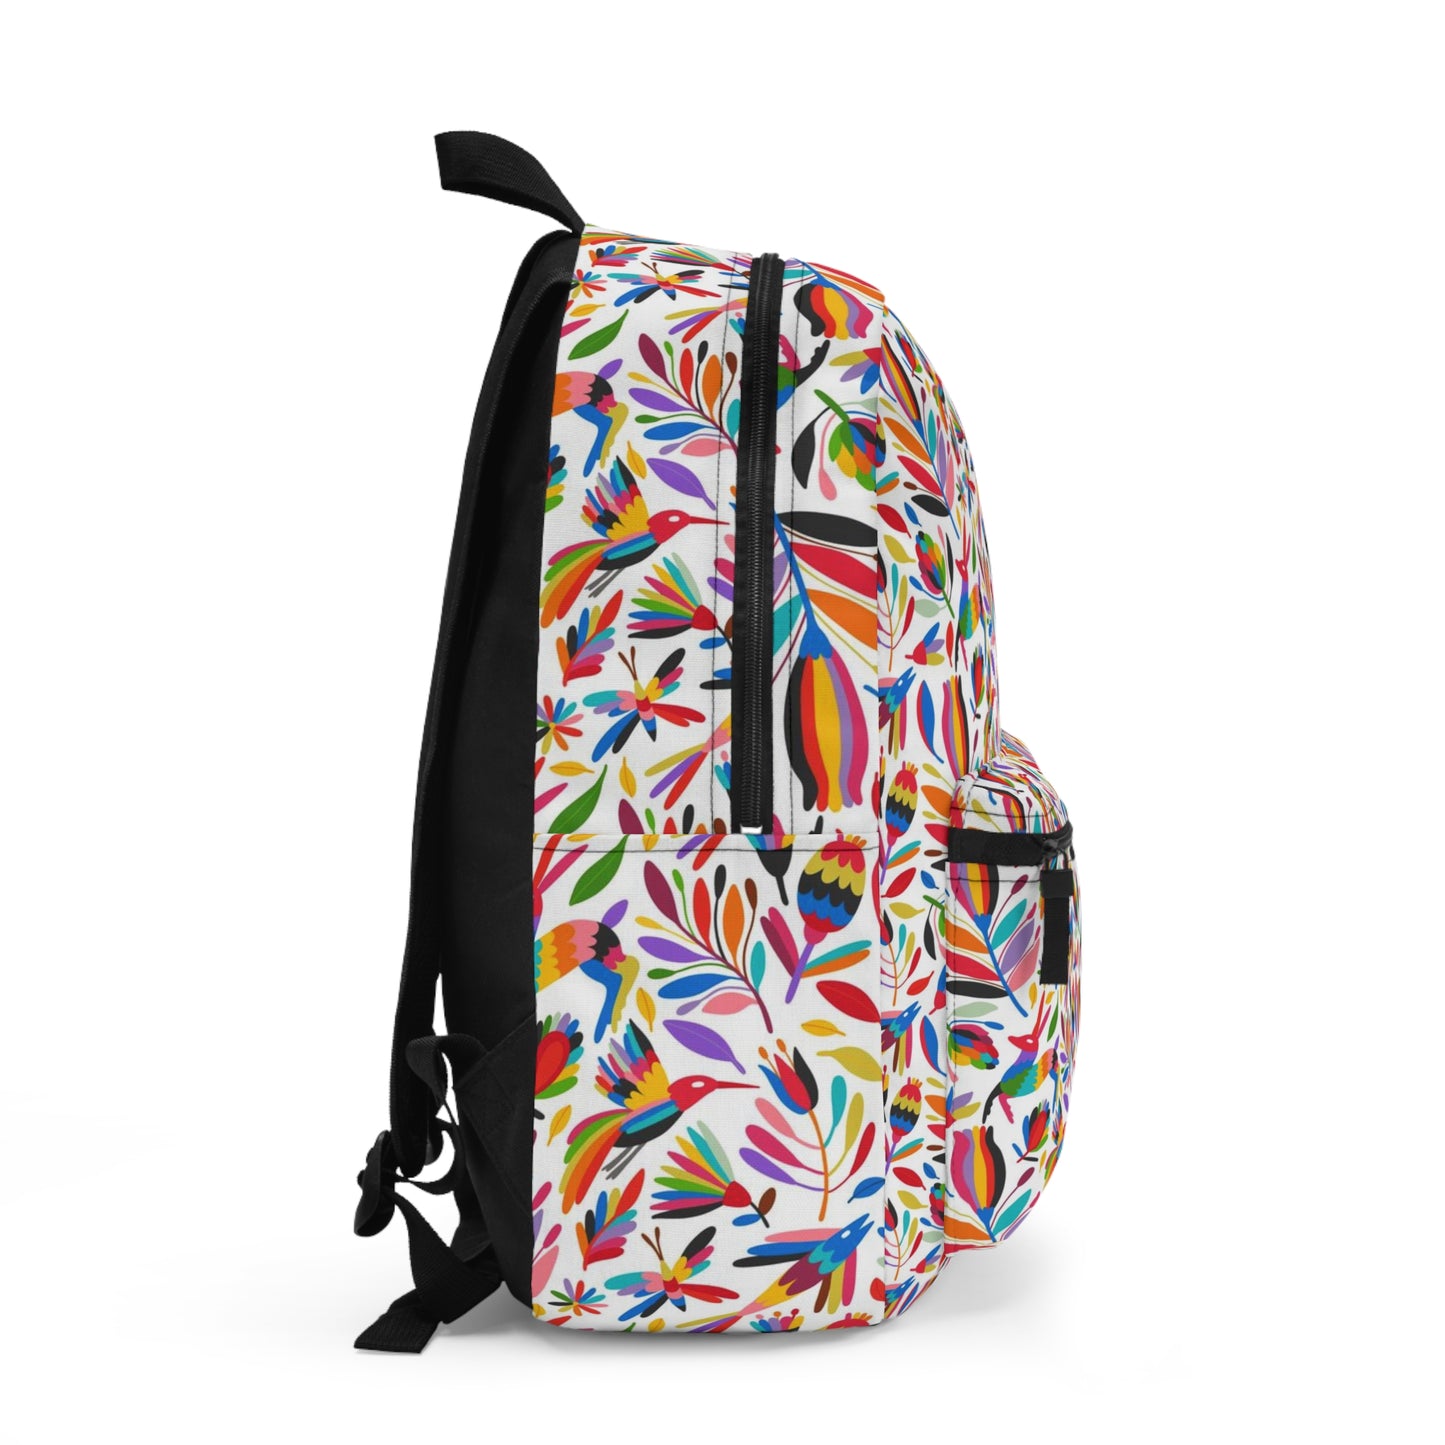 Otomi Backpack. Mexican backpack with colorful Otomi art. Casual, work or adventure bag with Mexican art.